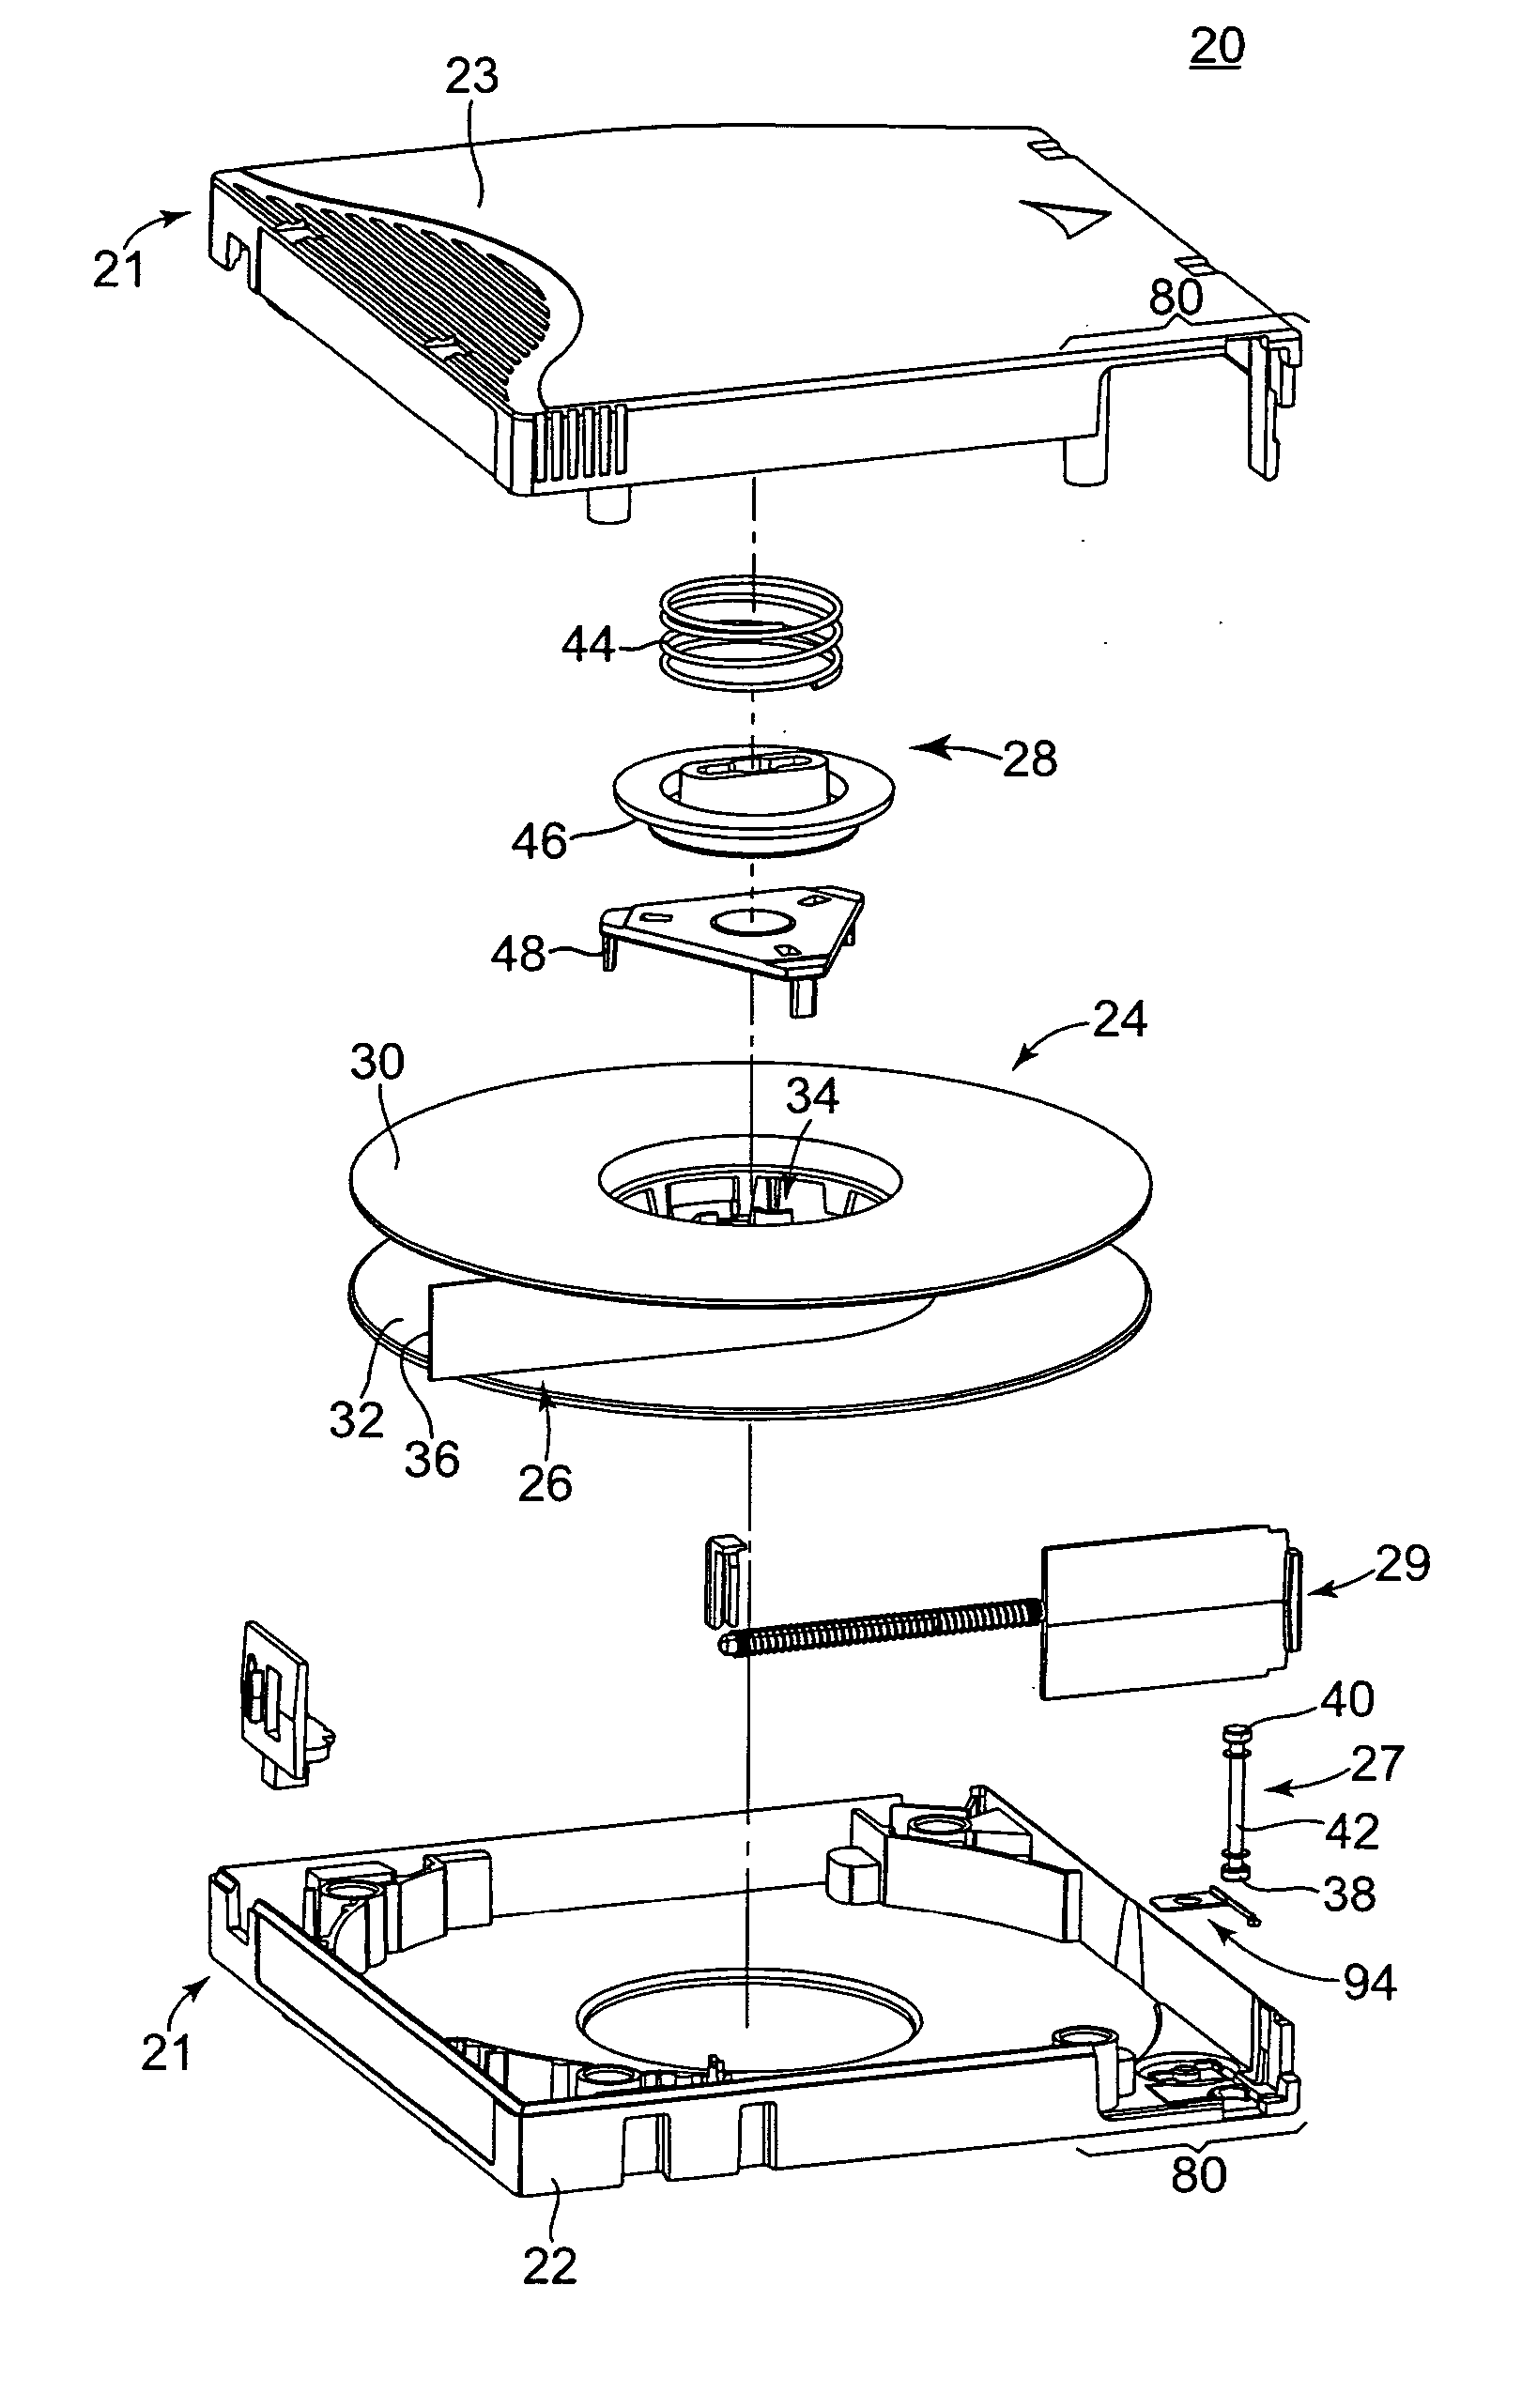 Data storage tape cartridge and leadering mechanism interaction